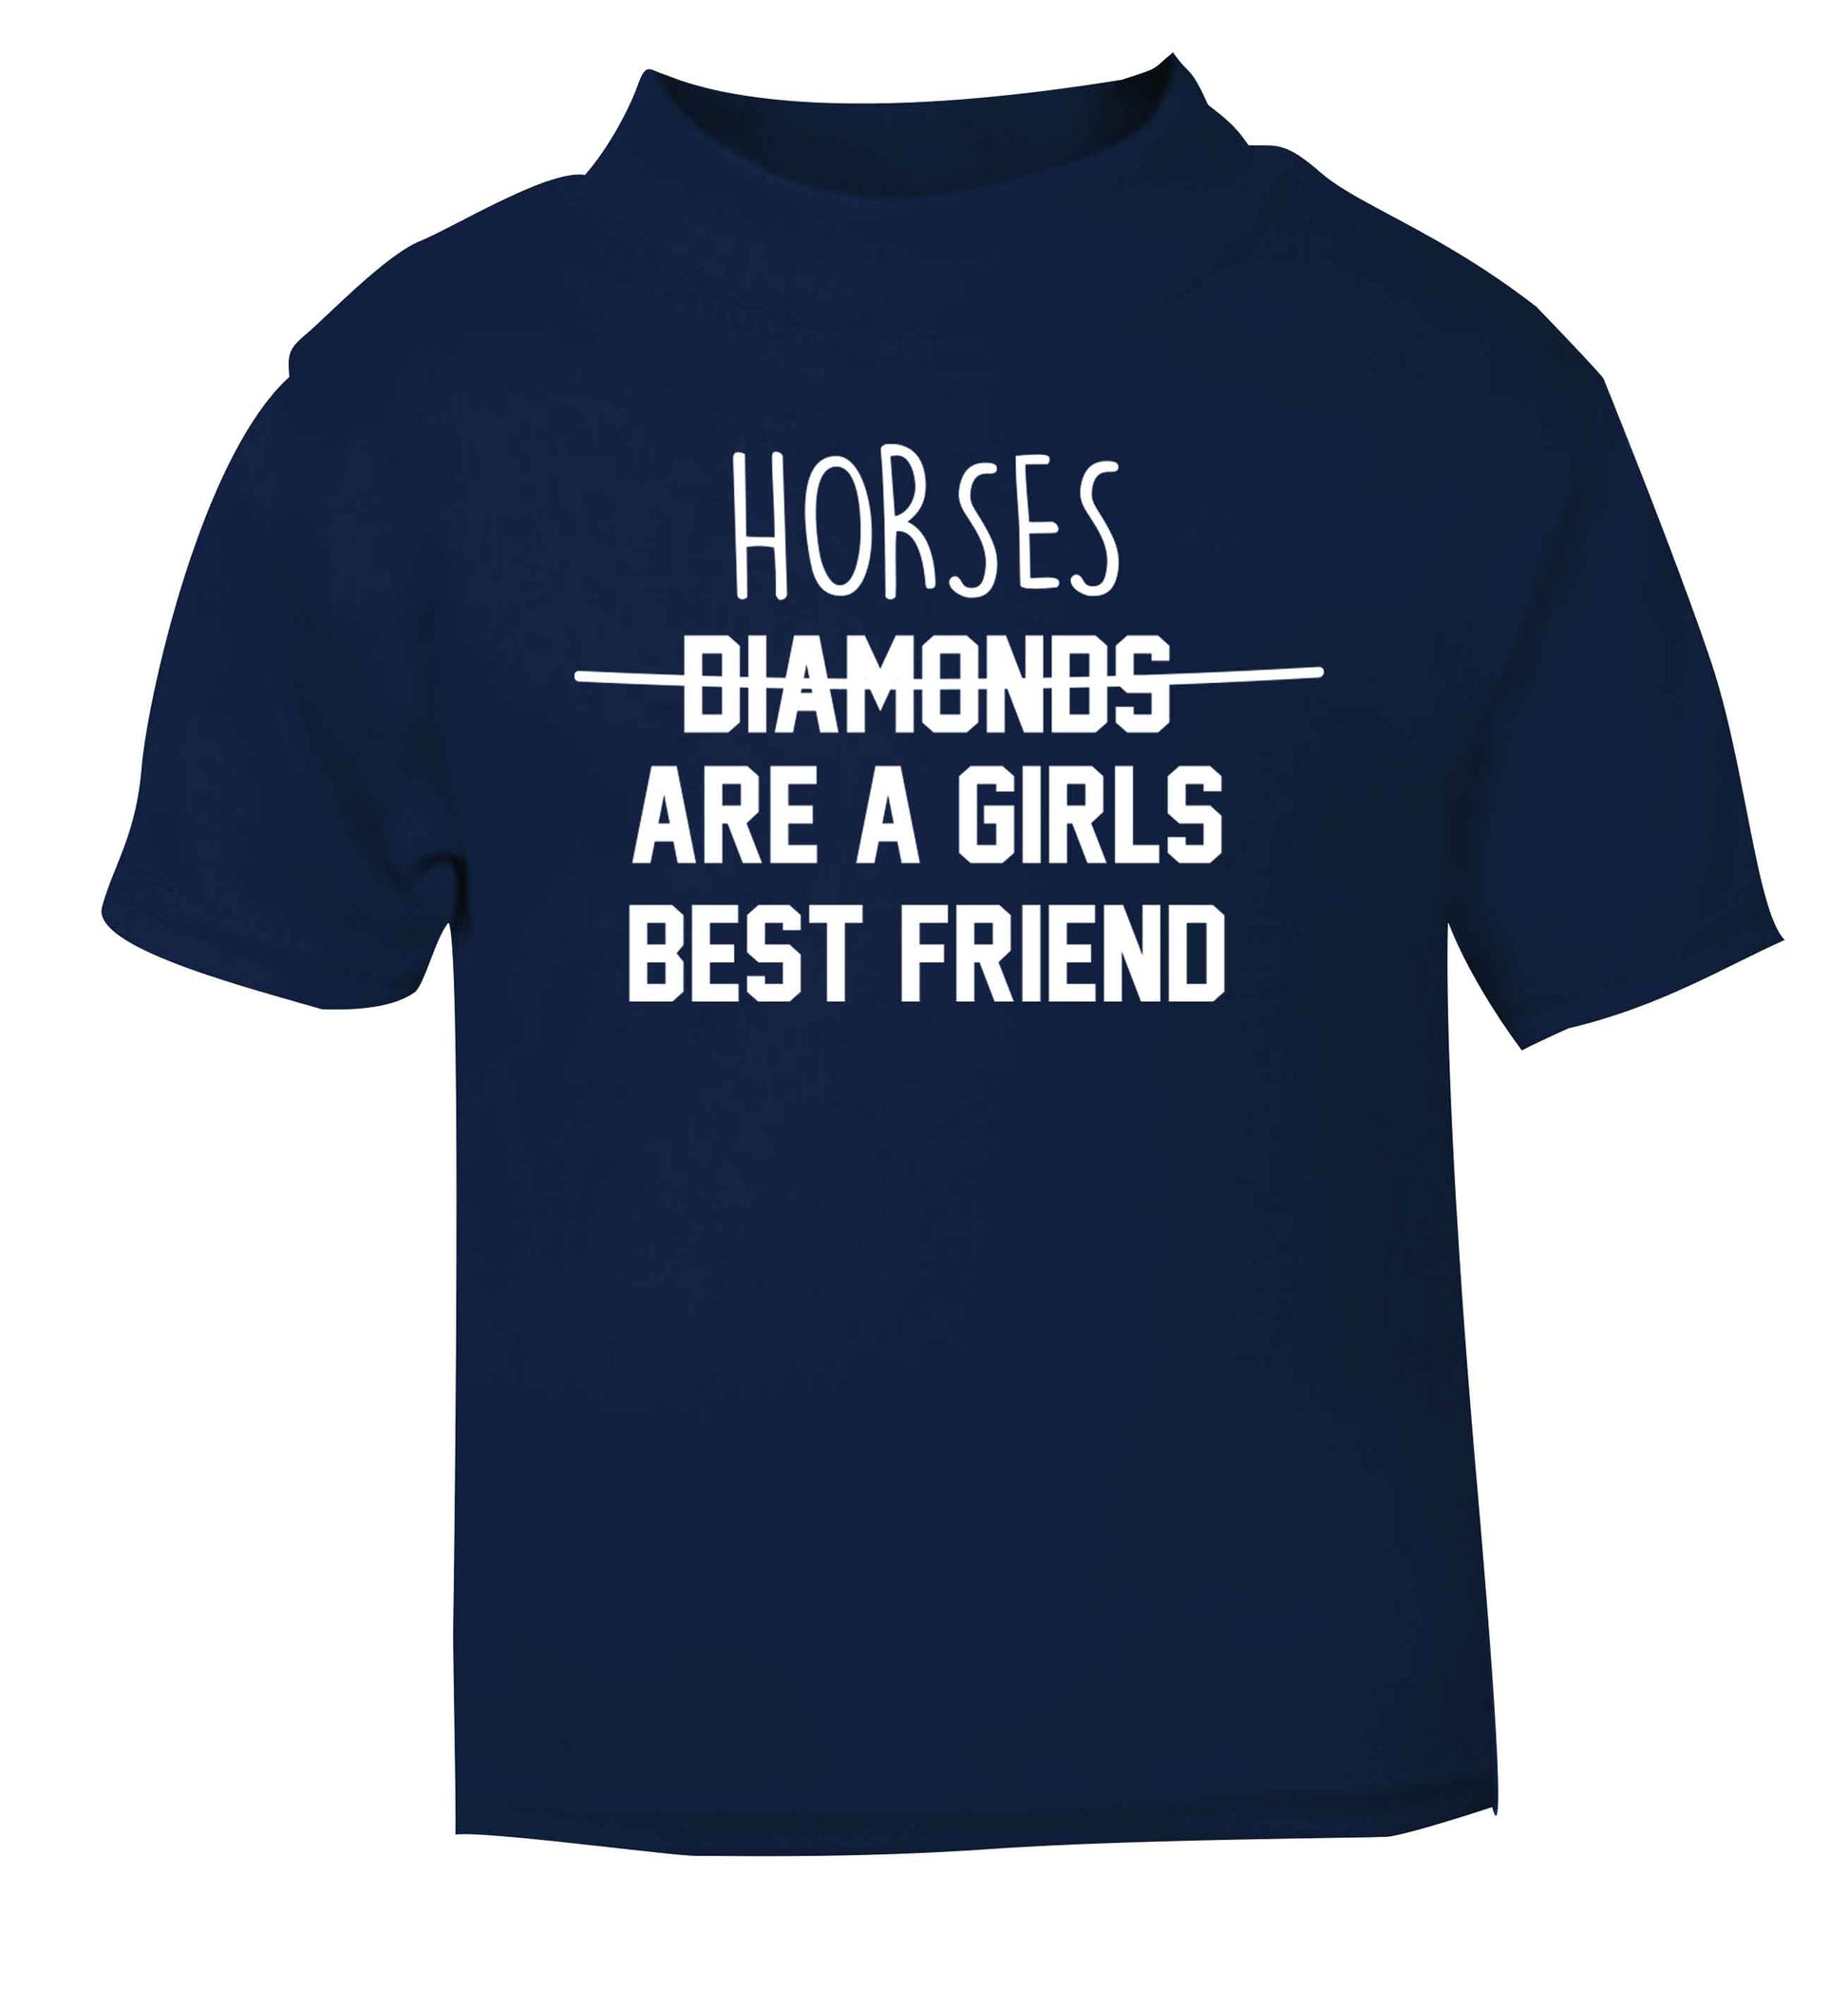 Horses are a girls best friend navy baby toddler Tshirt 2 Years